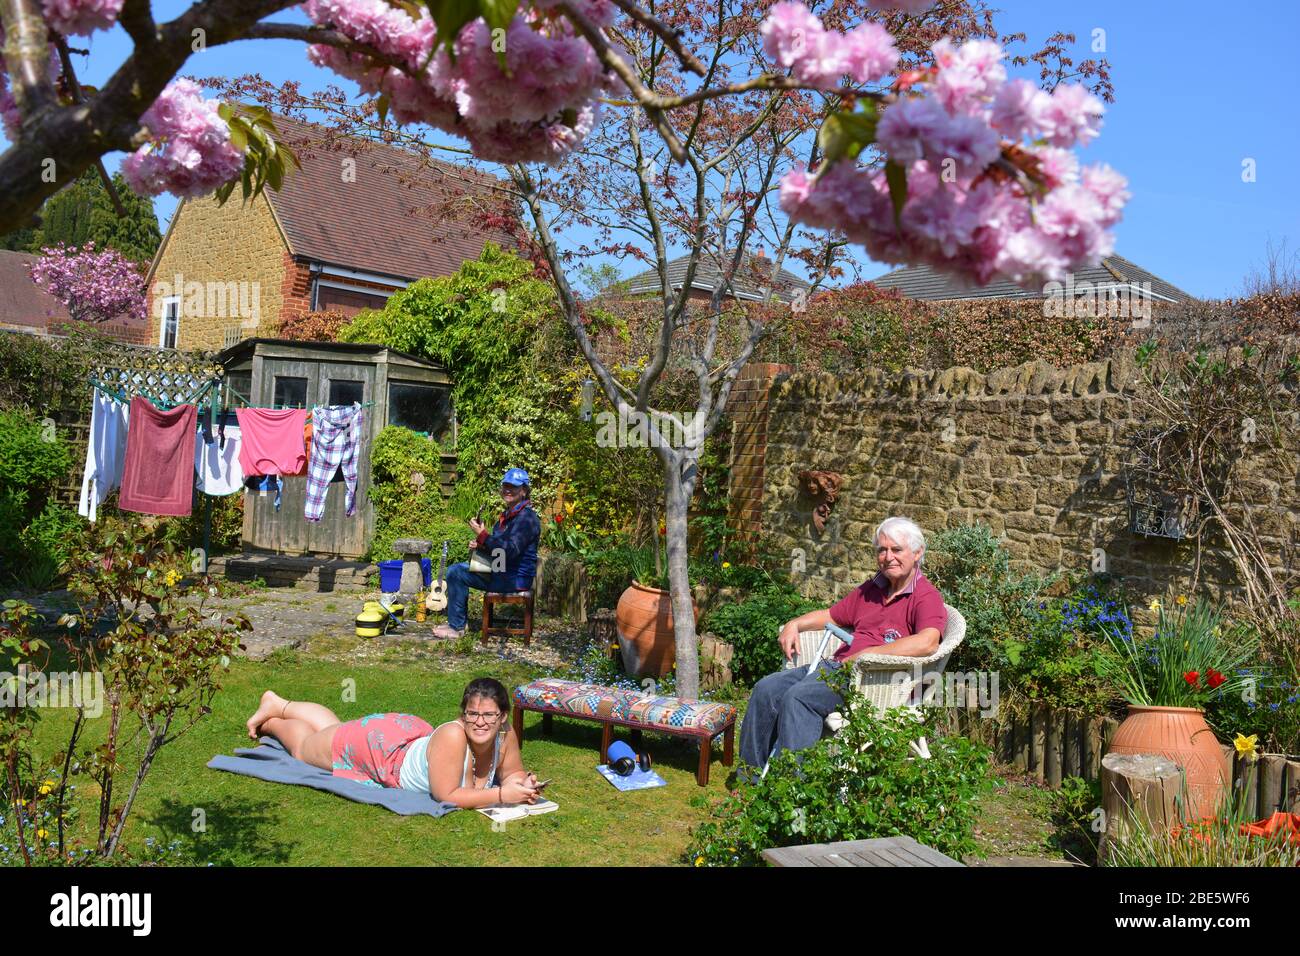 Family group enjoying the garden in the Springtime, Stay home, Stay safe, during the Covid-19 pandemic Stock Photo